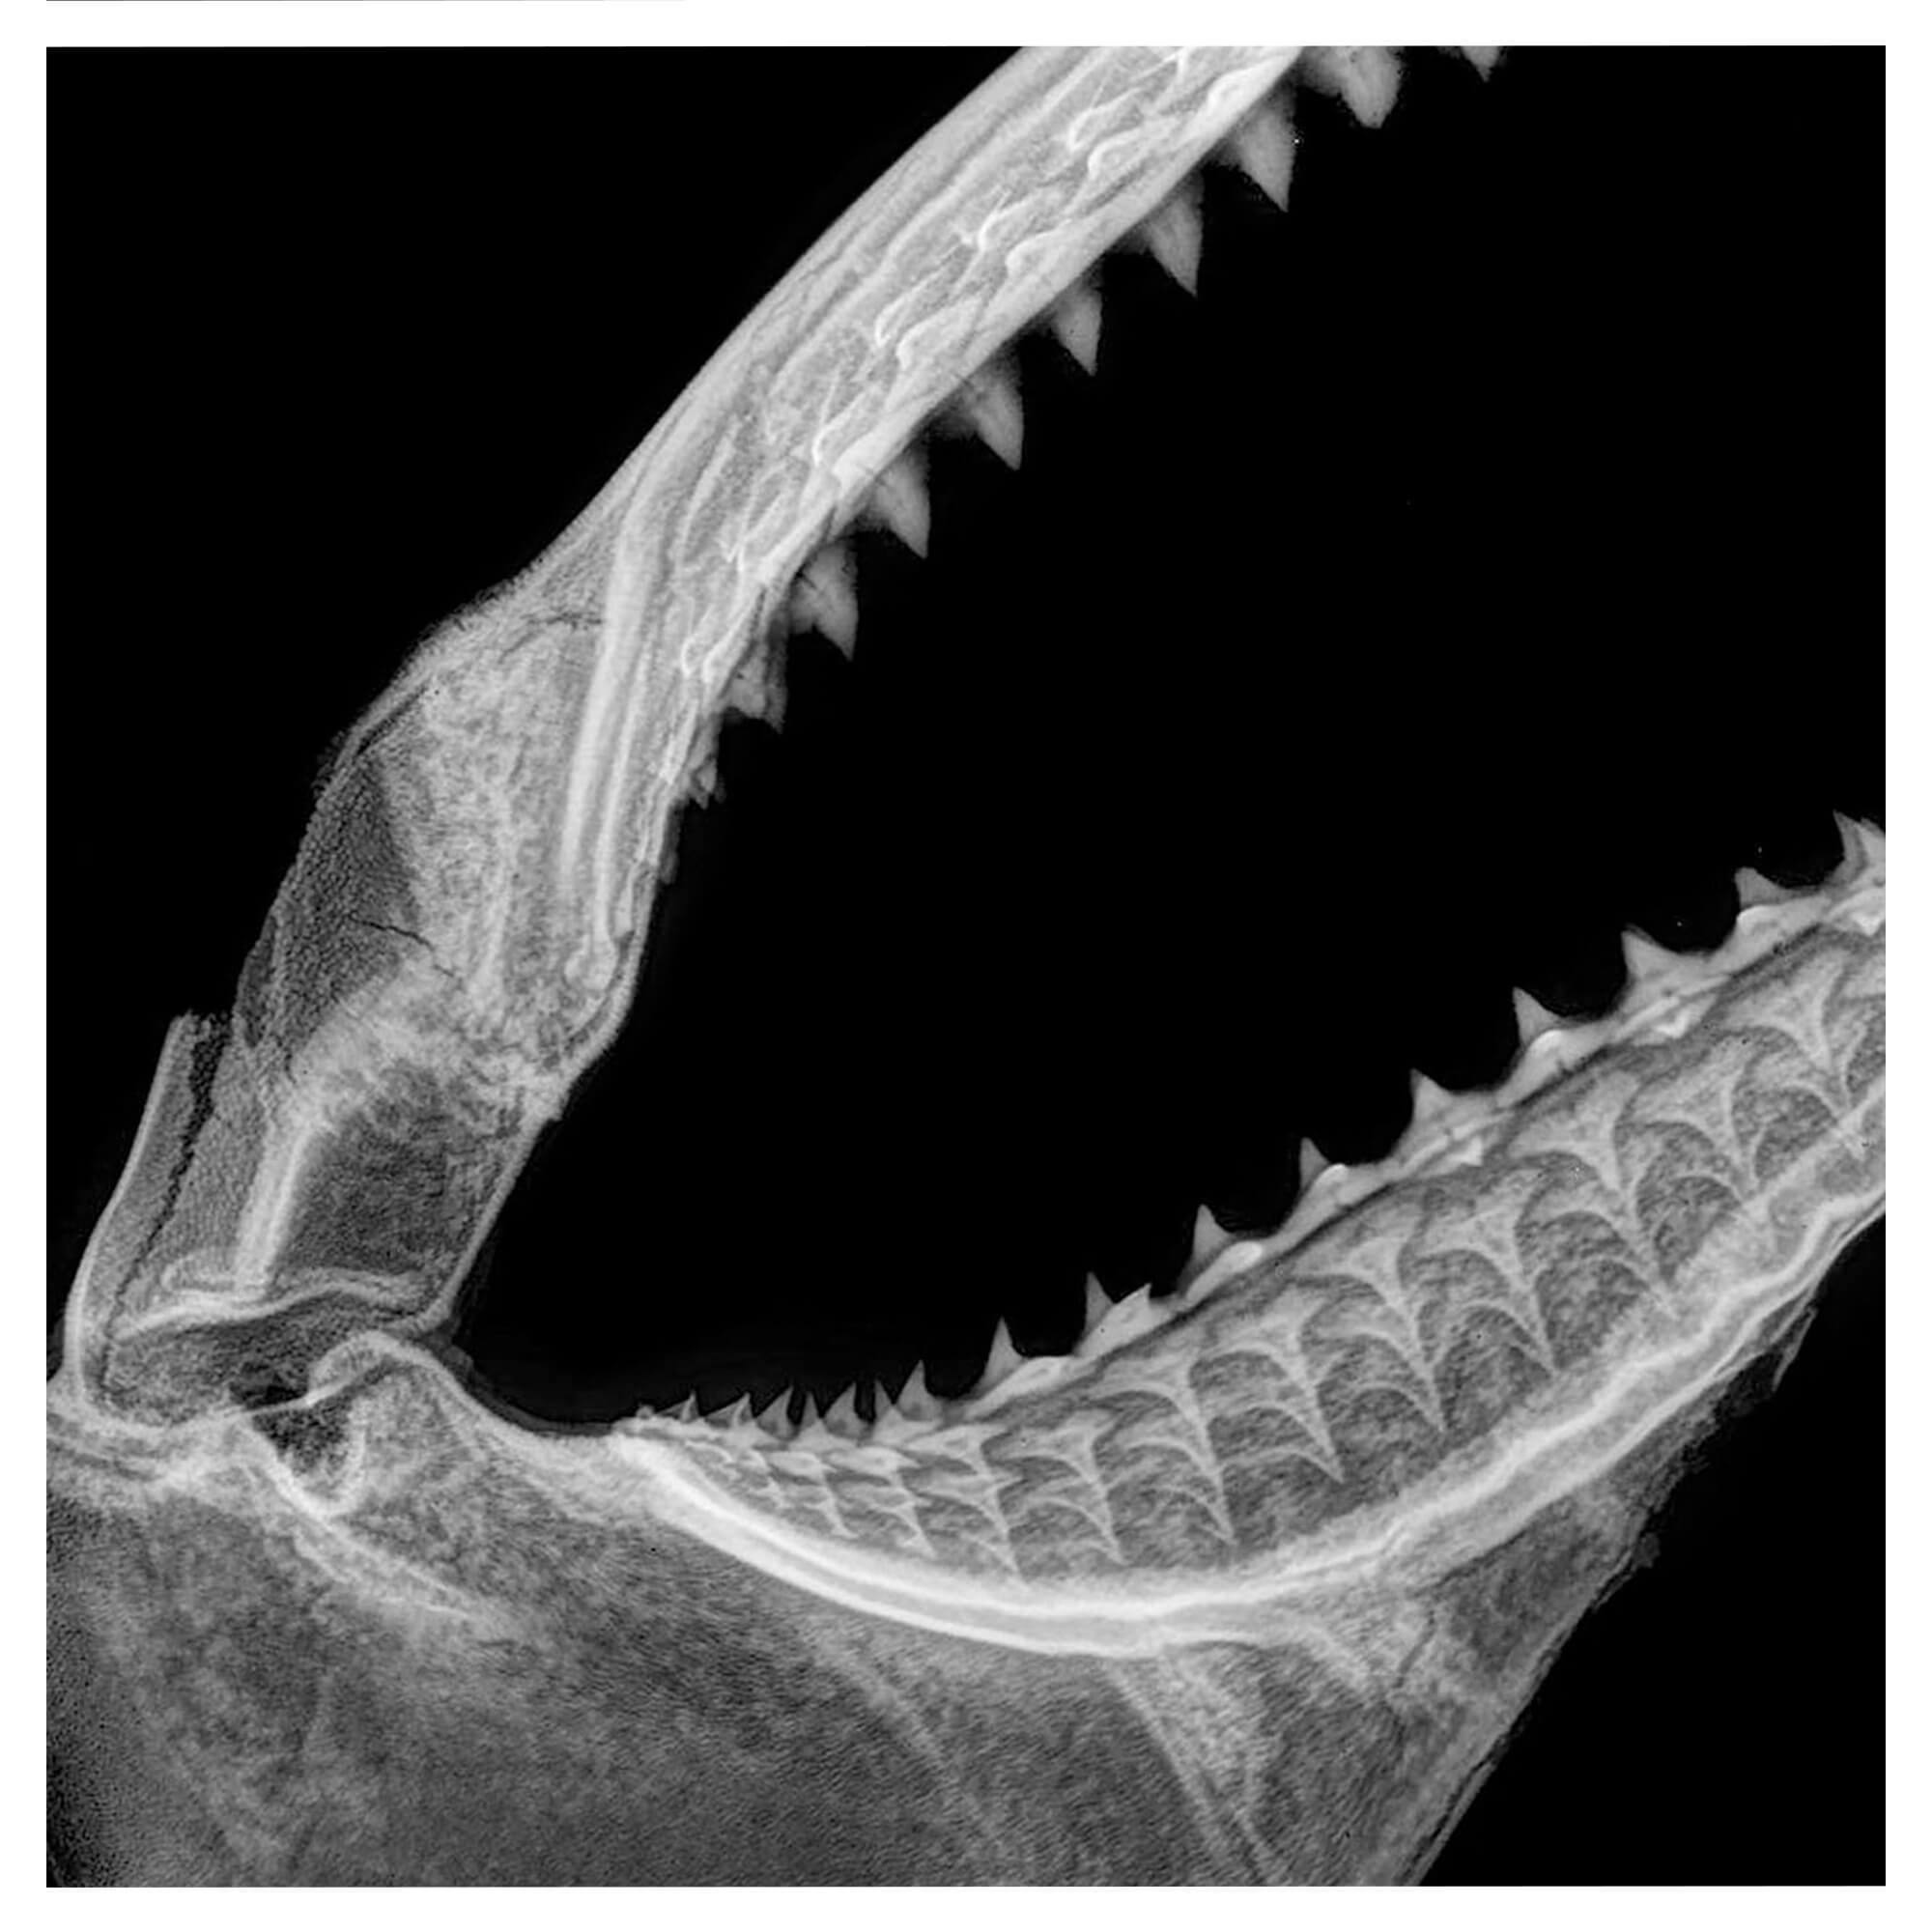 Close up details of the X-ray image of a shark's teeth by Hawaii artist Michelle Smith